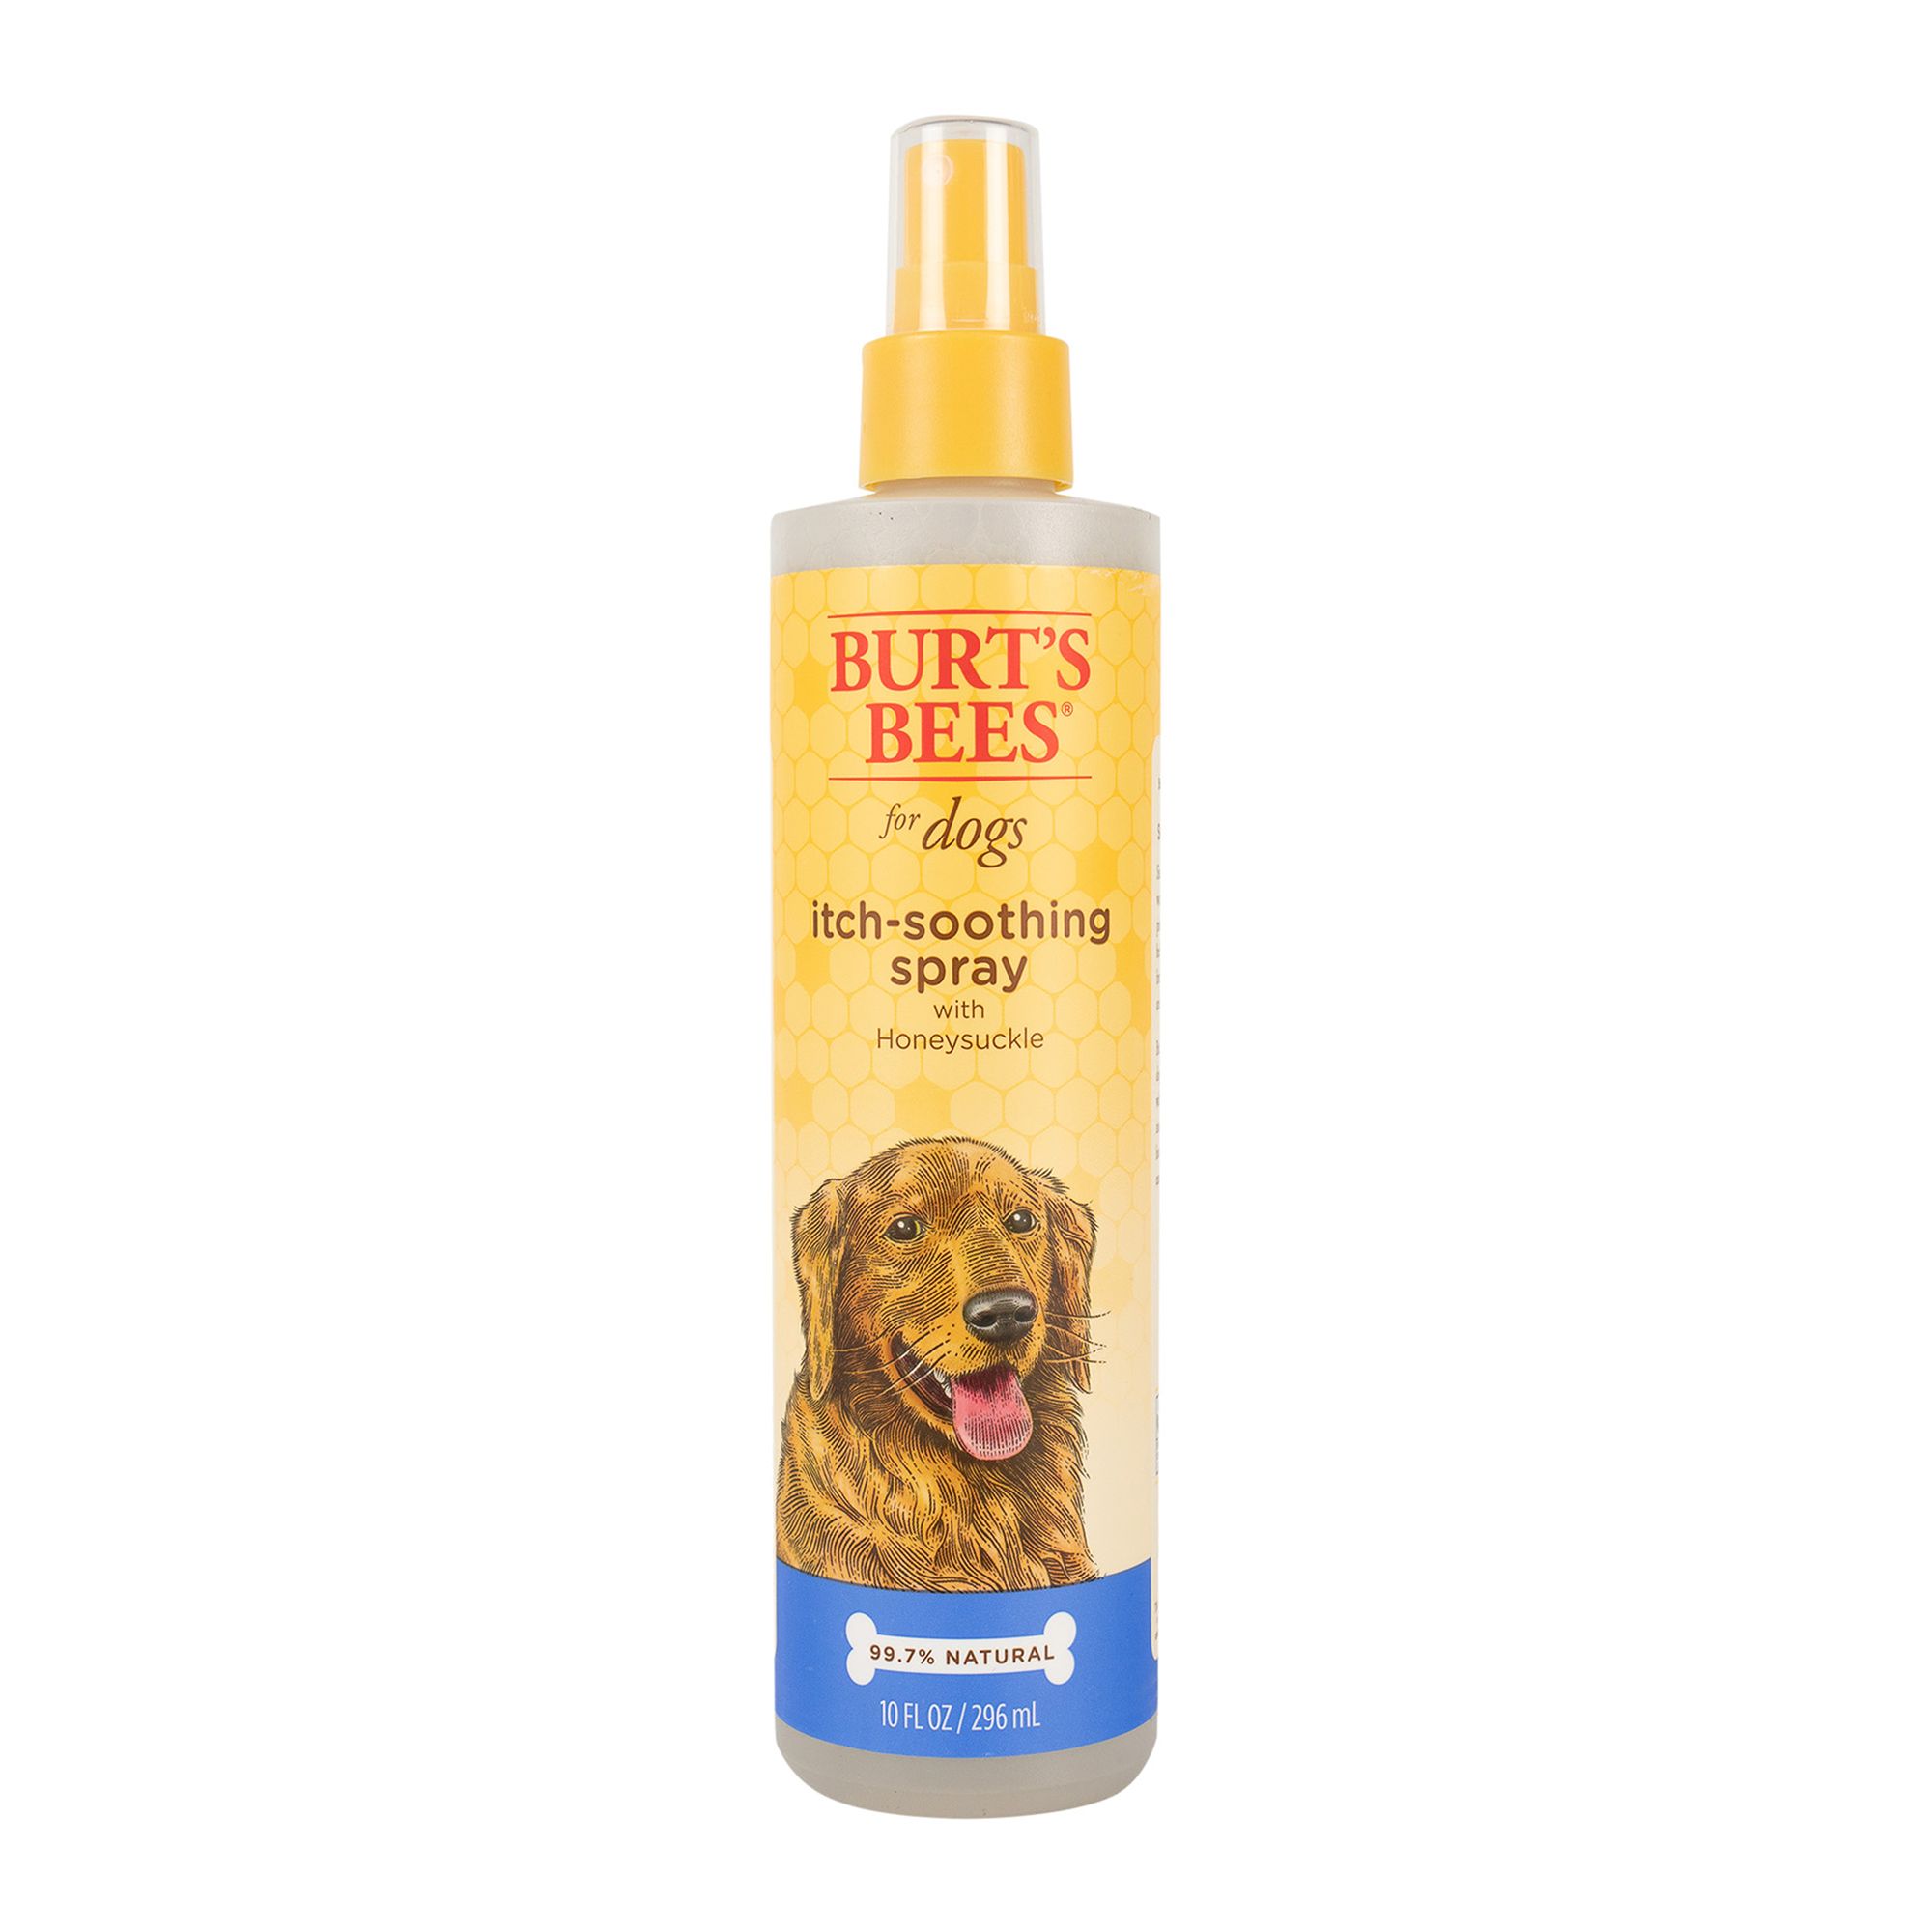 Burt's Bees® Itch-Soothing Dog Spray 